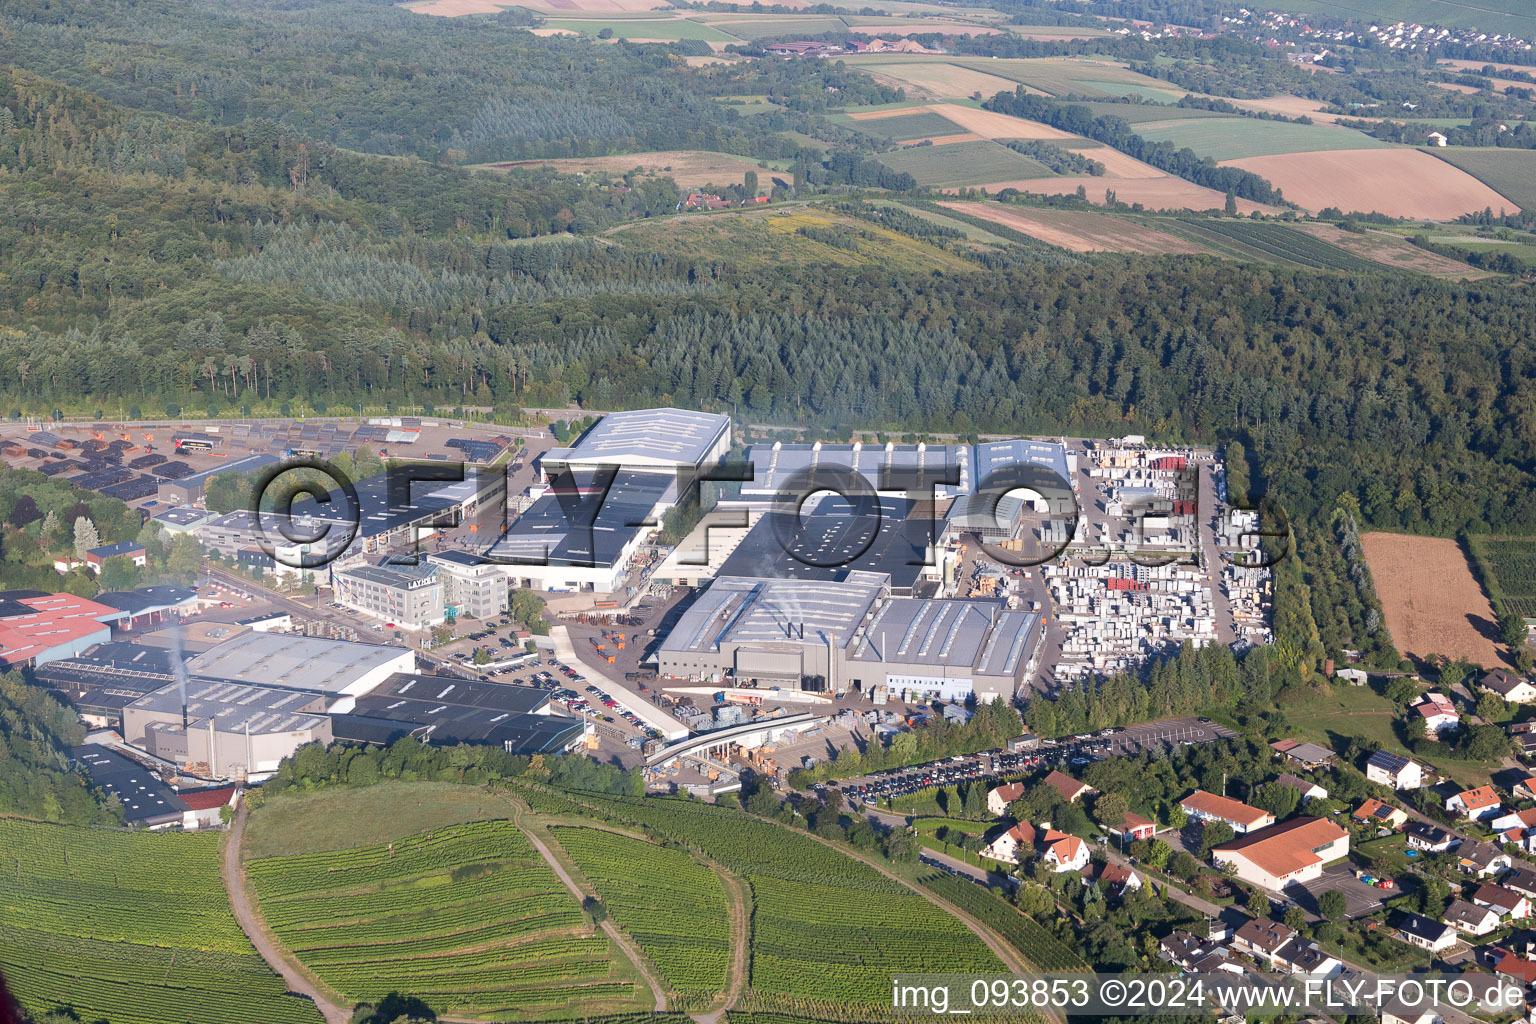 Building and production halls on the premises of Geruestbau Layher GmbH in the district Frauenzimmern in Gueglingen in the state Baden-Wurttemberg